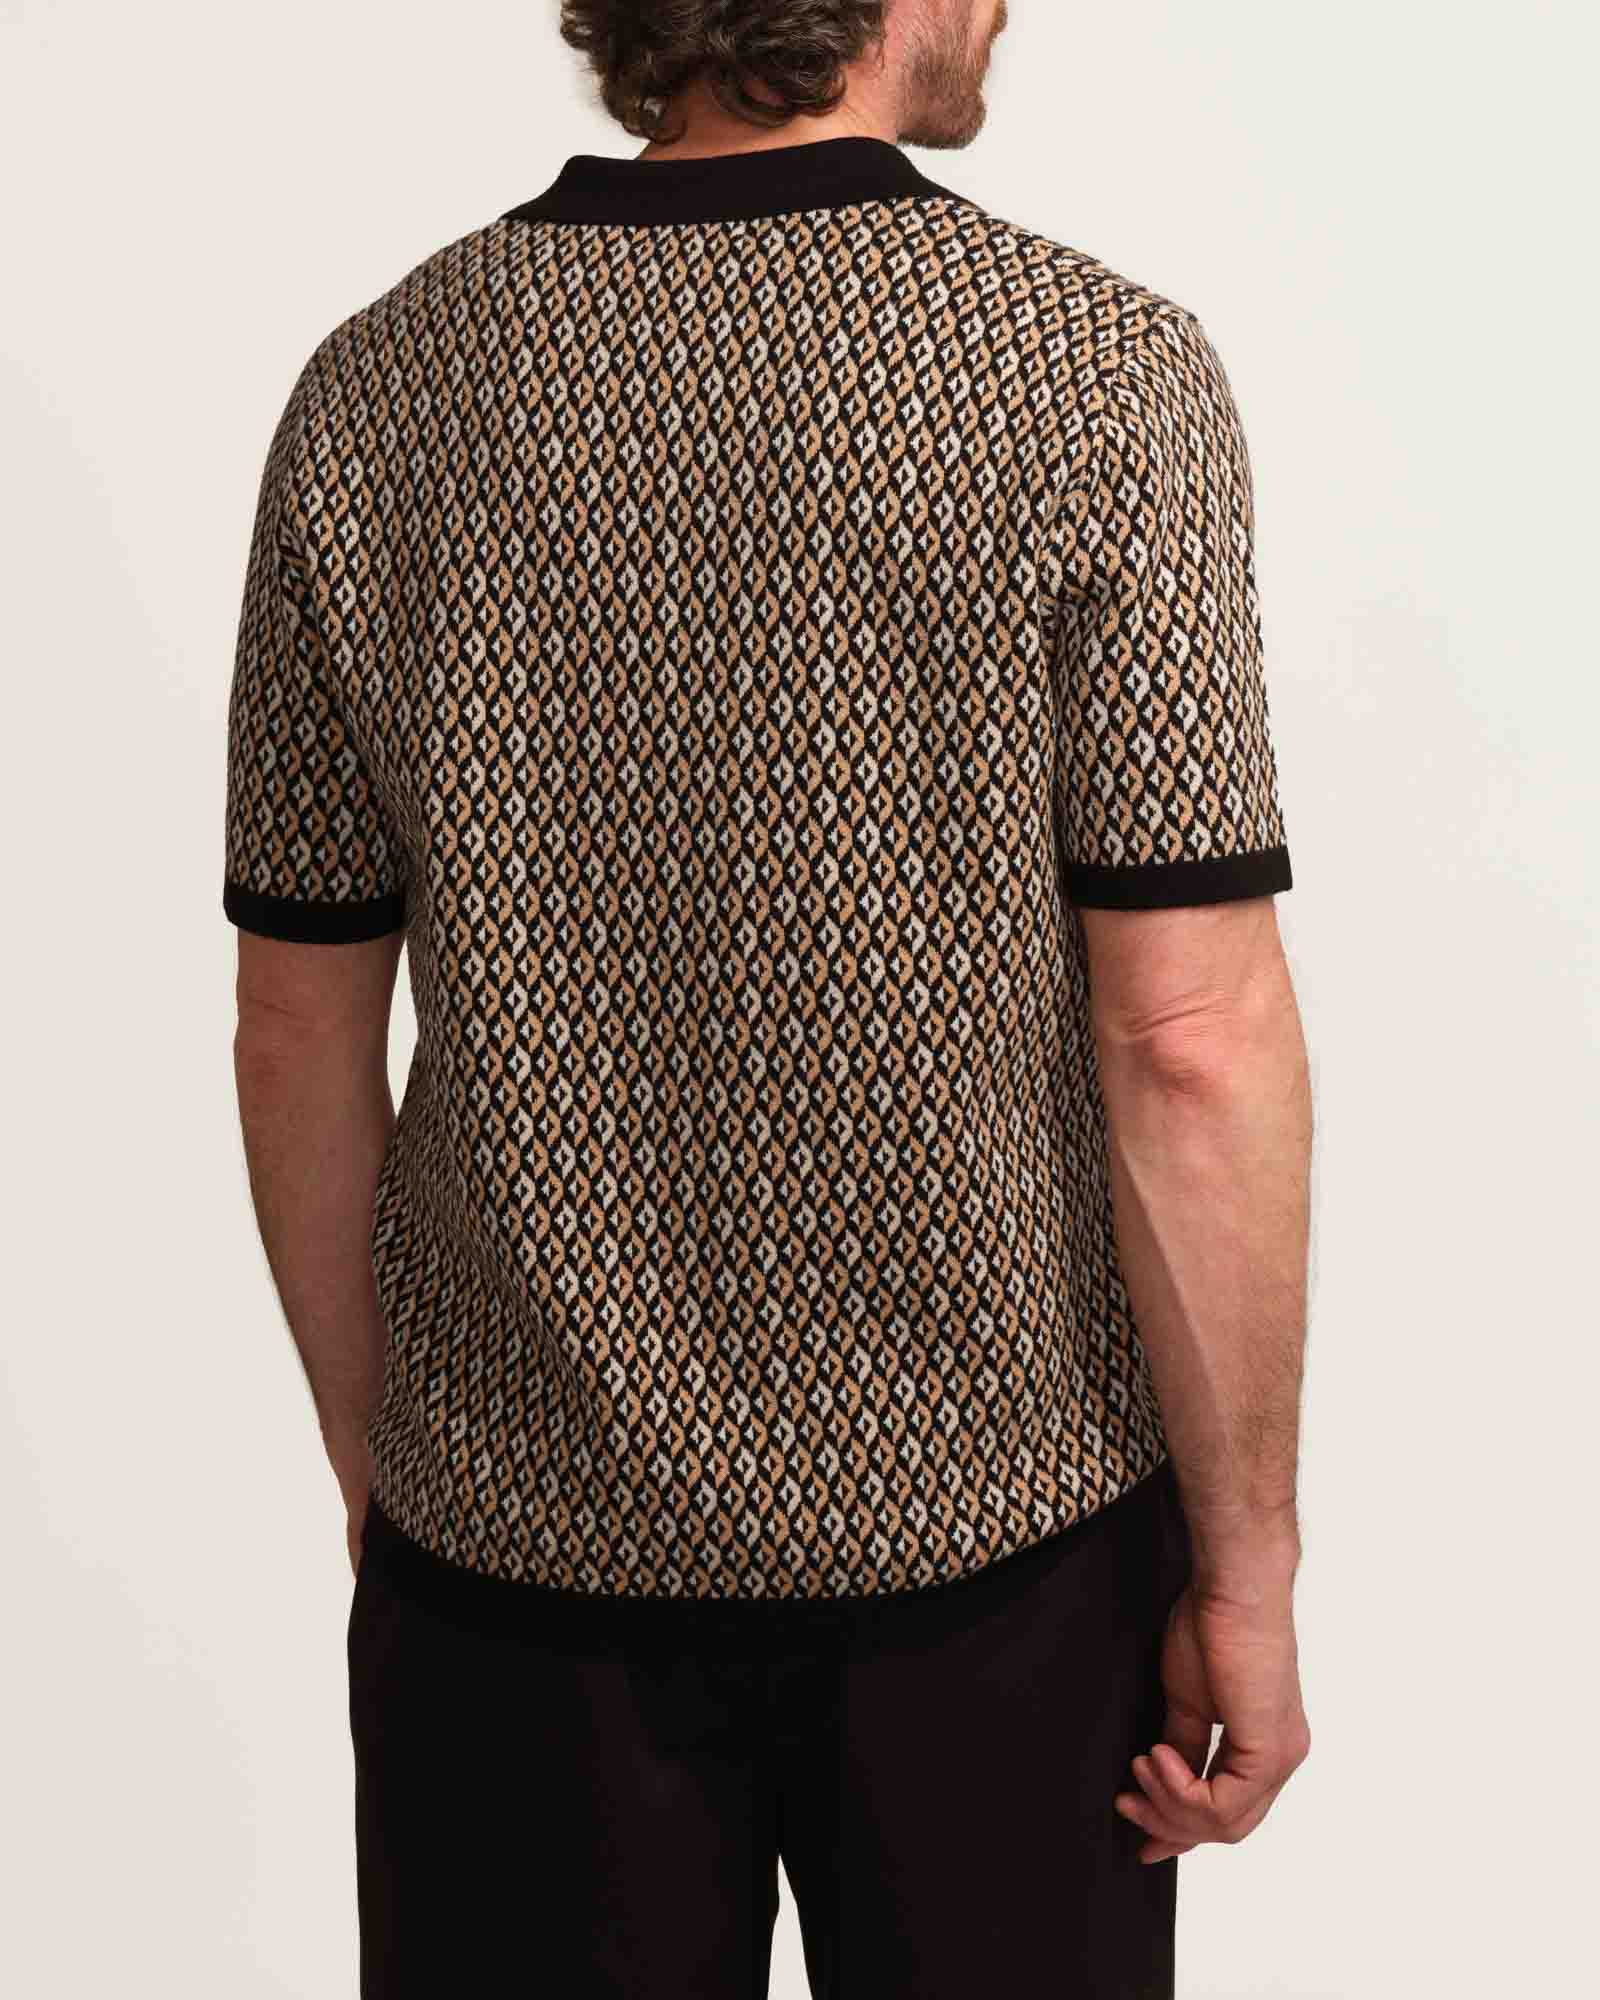 Truth Men's Abstract Jacquard Sweater Polo | JANE + MERCER